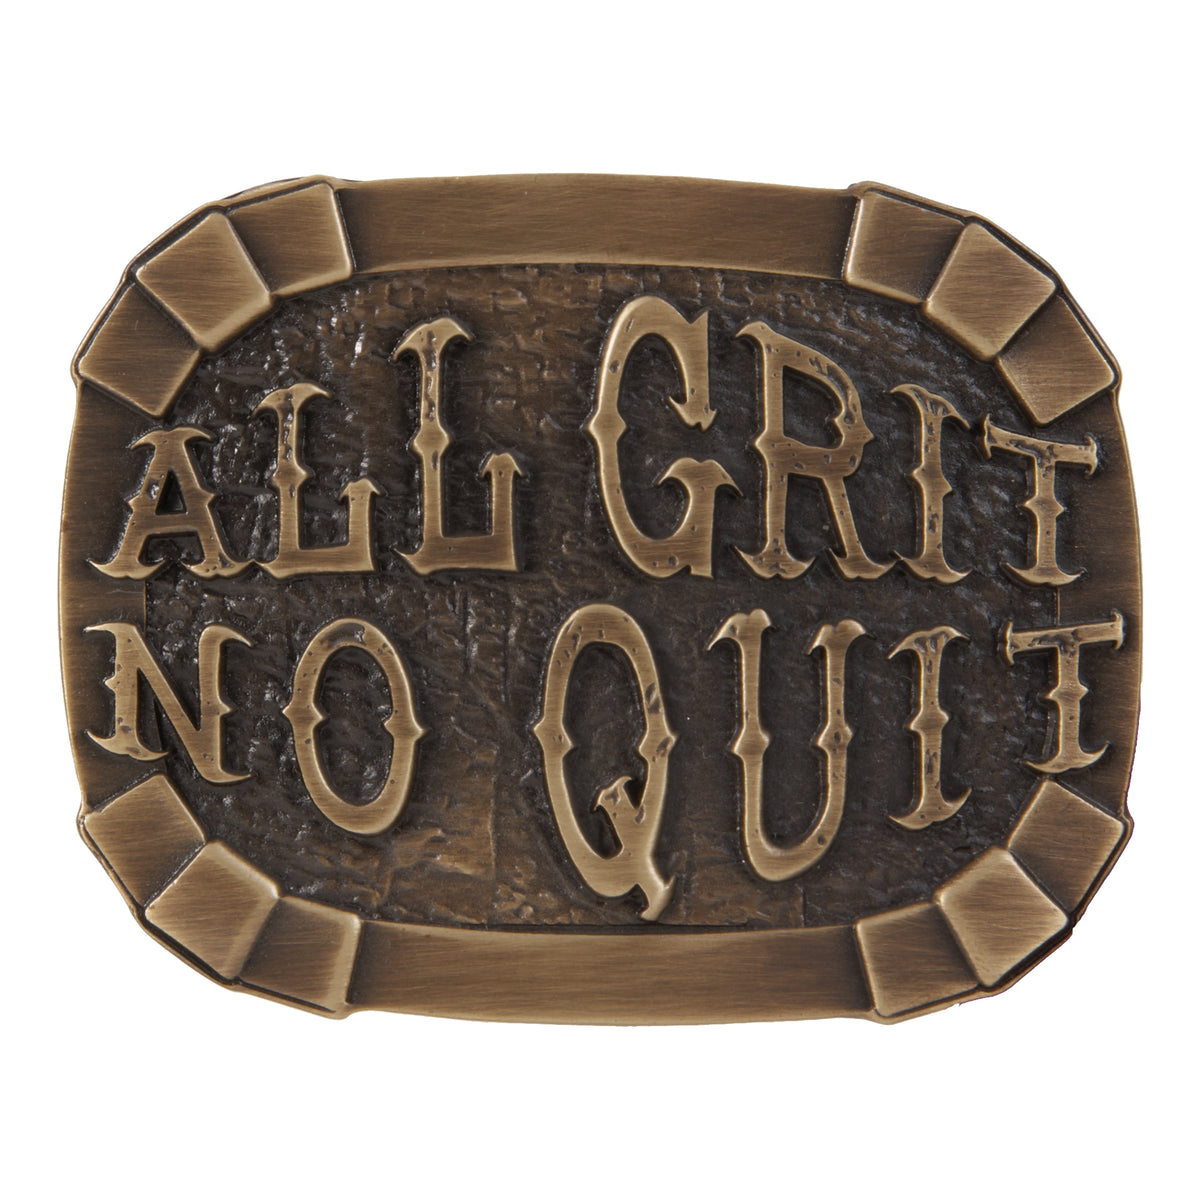 All Grit, No Quit Buckle